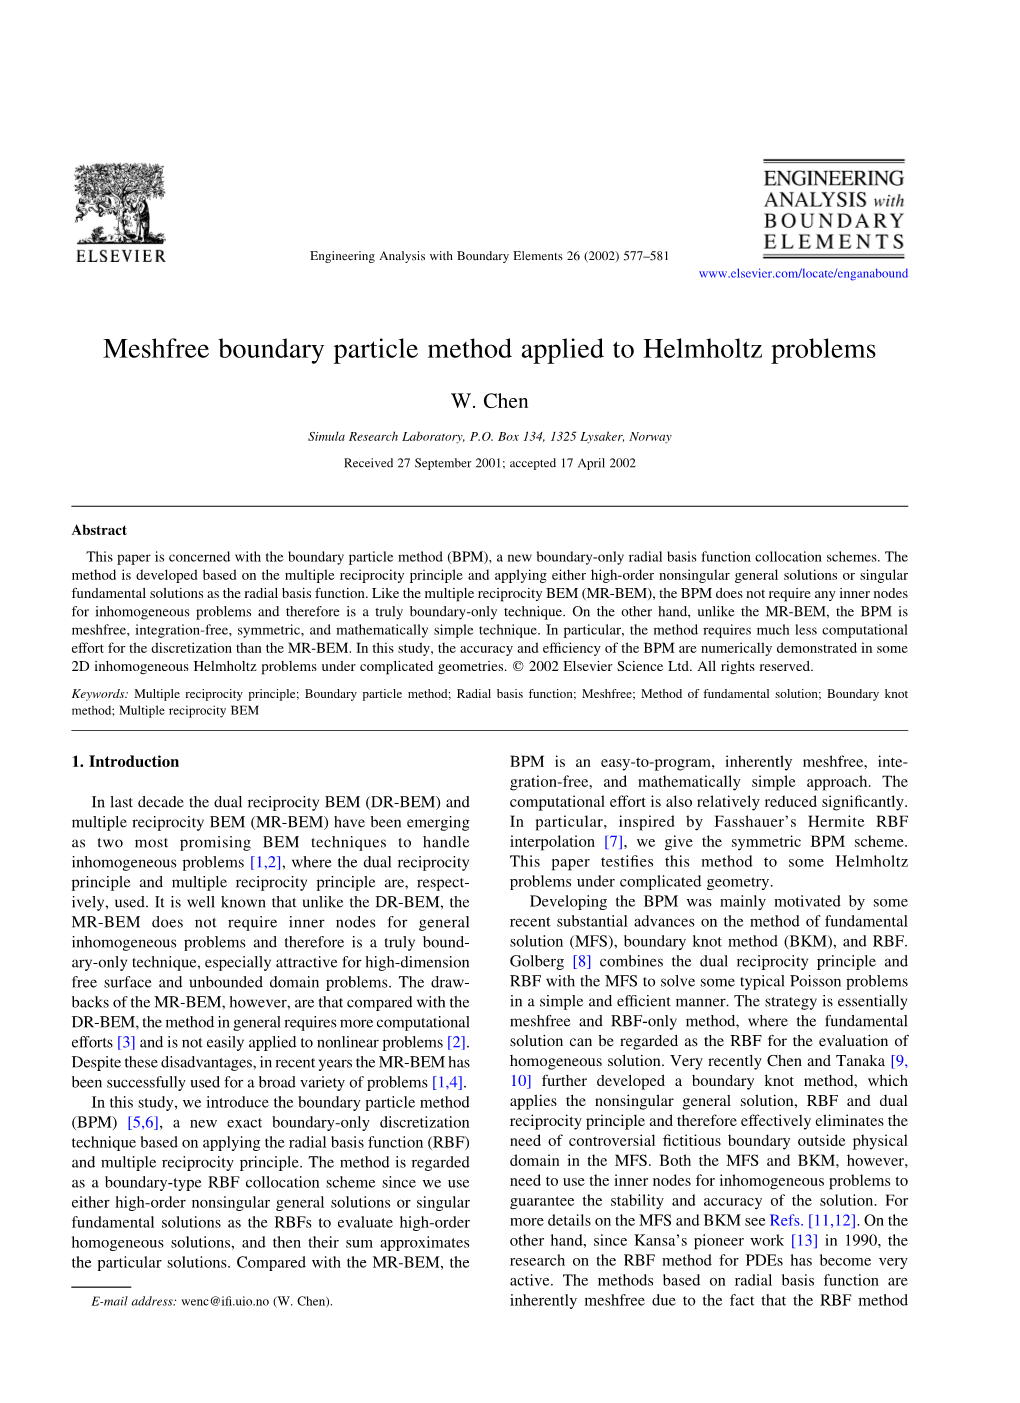 Meshfree Boundary Particle Method Applied to Helmholtz Problems